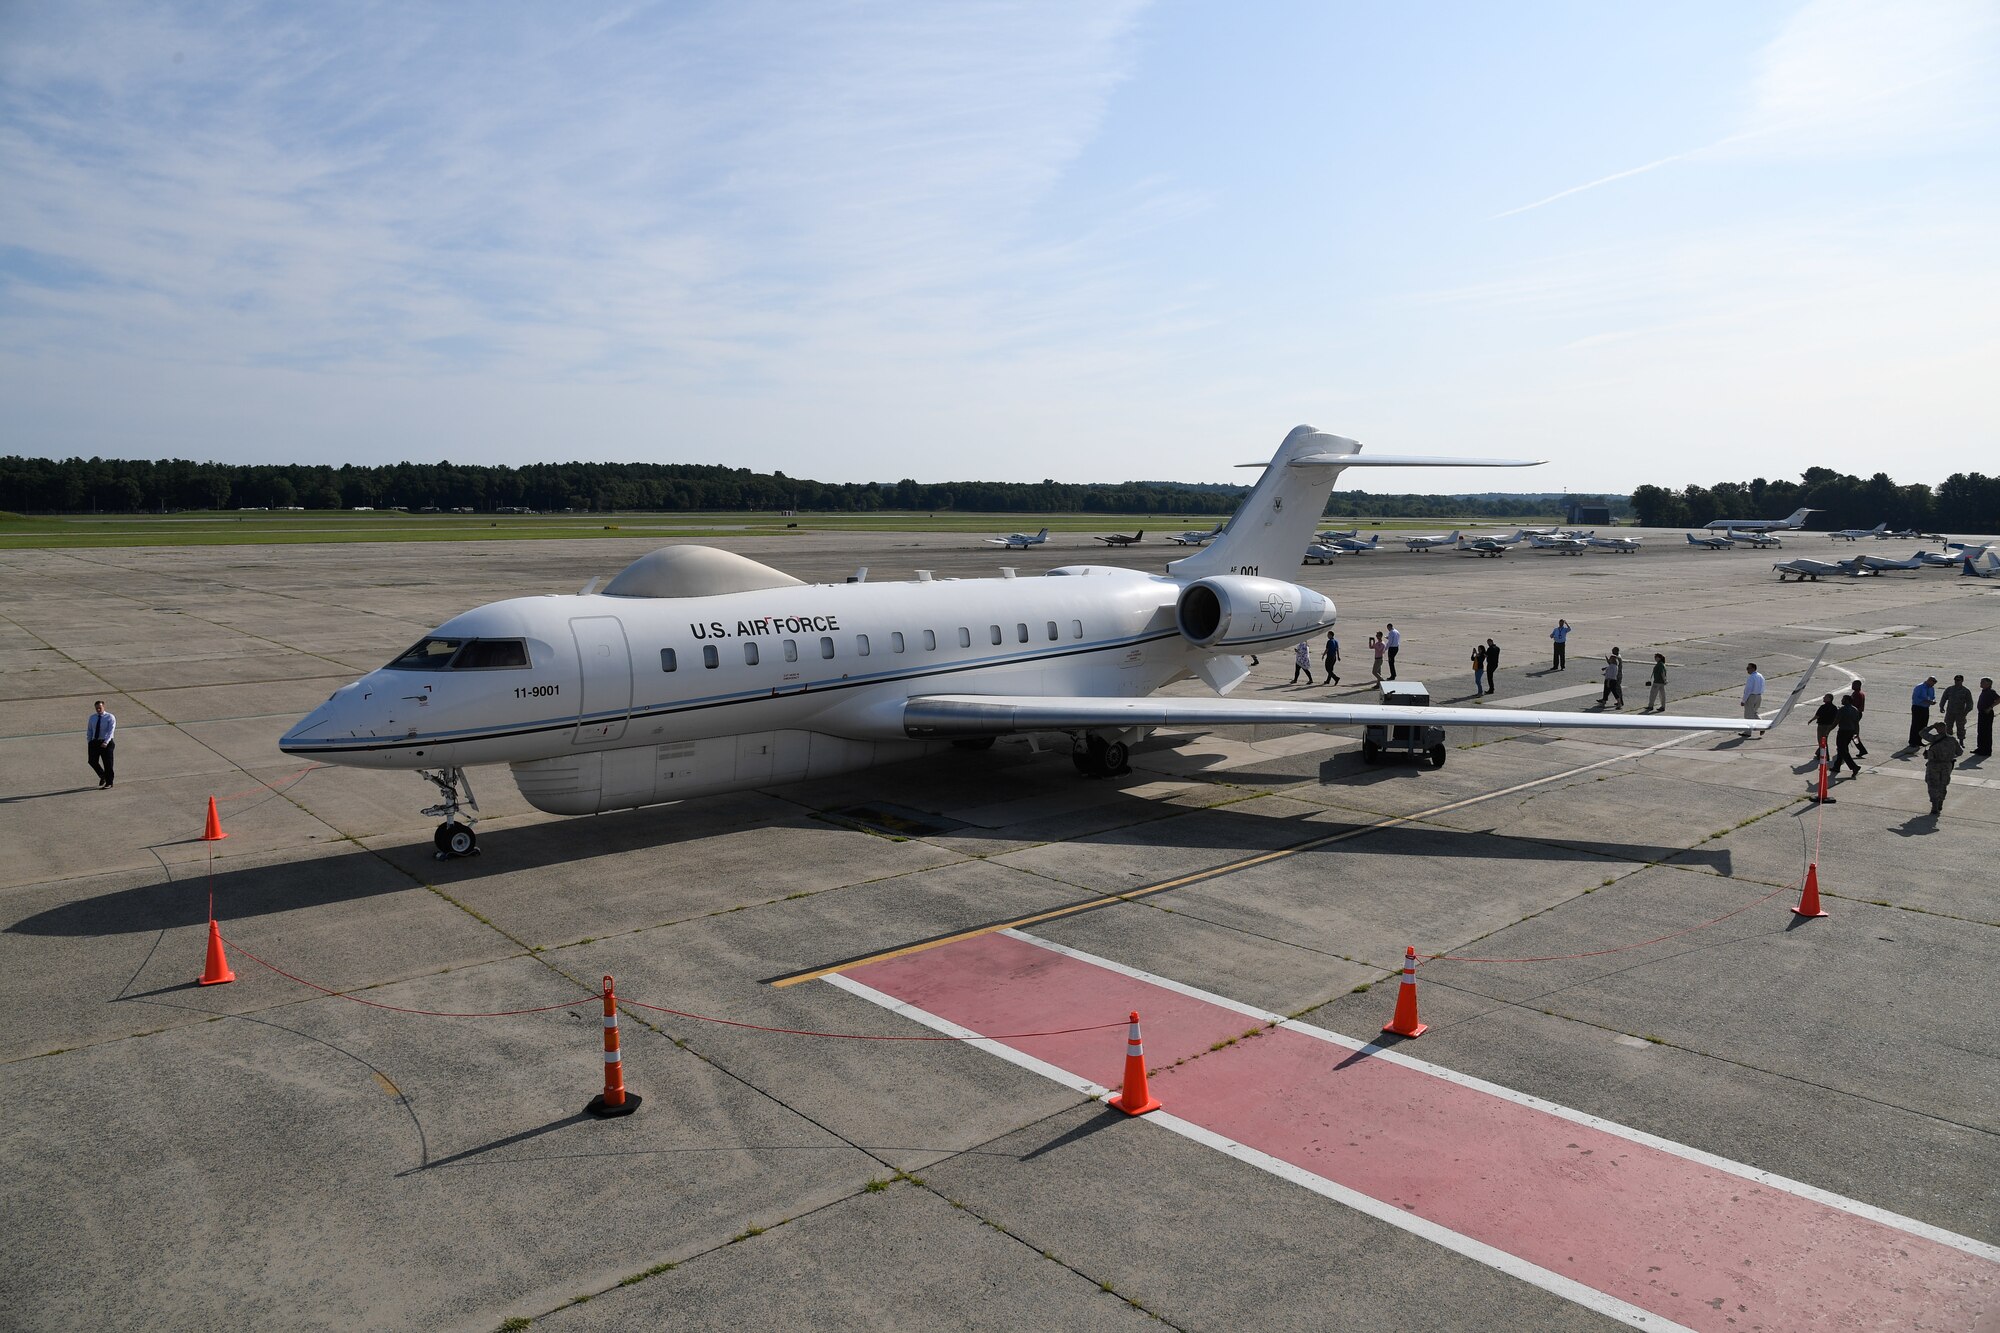 A Battlefield Airborne Communications Node-equipped E-11A aircraft rolls out on the flightline at Hanscom Air Force Base, Mass., in July 2018. On June 1, the BACN program office at Hanscom awarded a $464.8 million contract to Learjet, Inc., a U.S. subsidiary of the Specialized Aircraft Division of Bombardier Inc., for up to six Bombardier Global 6000 aircraft with a five-year delivery period. (U.S. Air Force photo by Mark Herlihy)